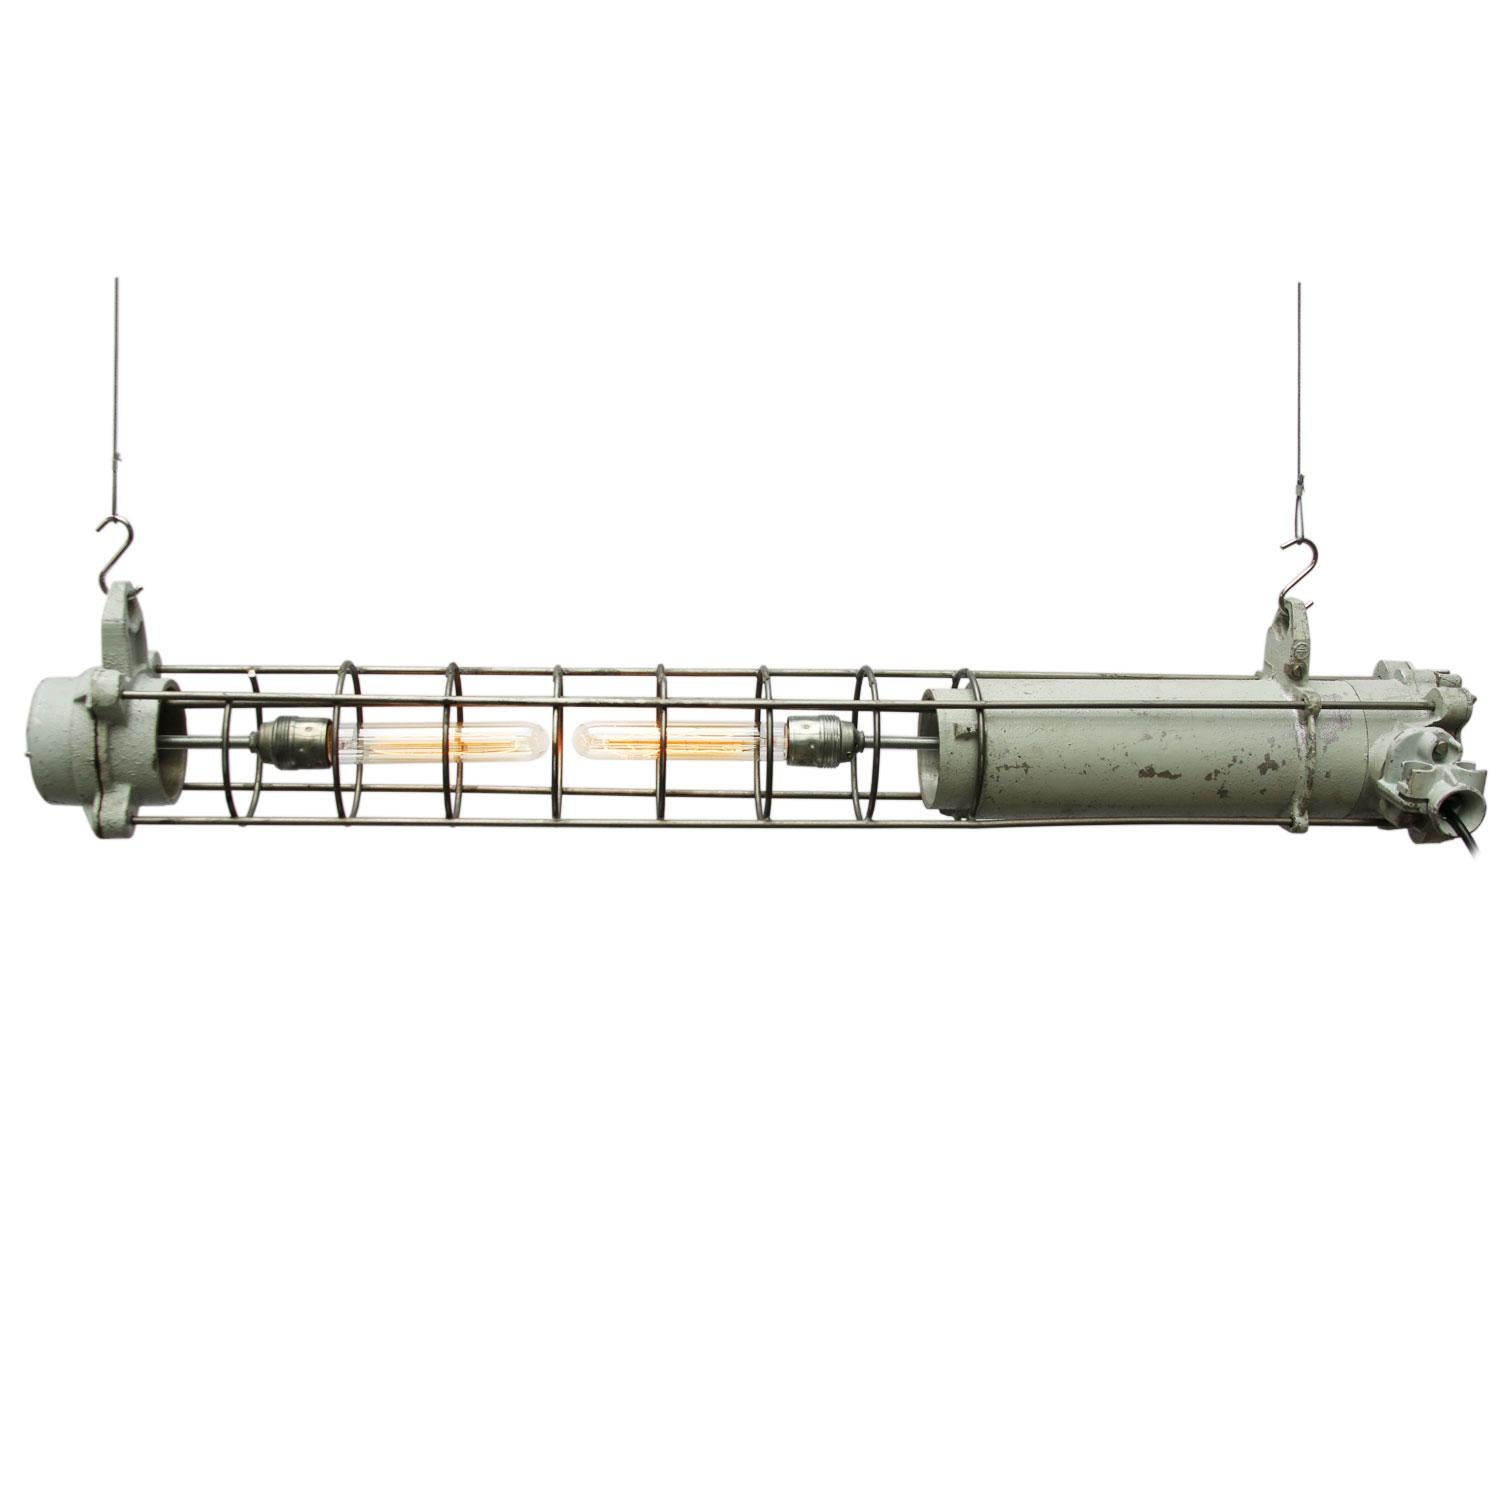 Industrial cast aluminum light.

2x E27/E26 bulb holders. Excluding tubes / bulbs.

Weight 6.00 kg / 13.2 lb

Priced per individual item. All lamps have been made suitable by international standards for incandescent light bulbs,